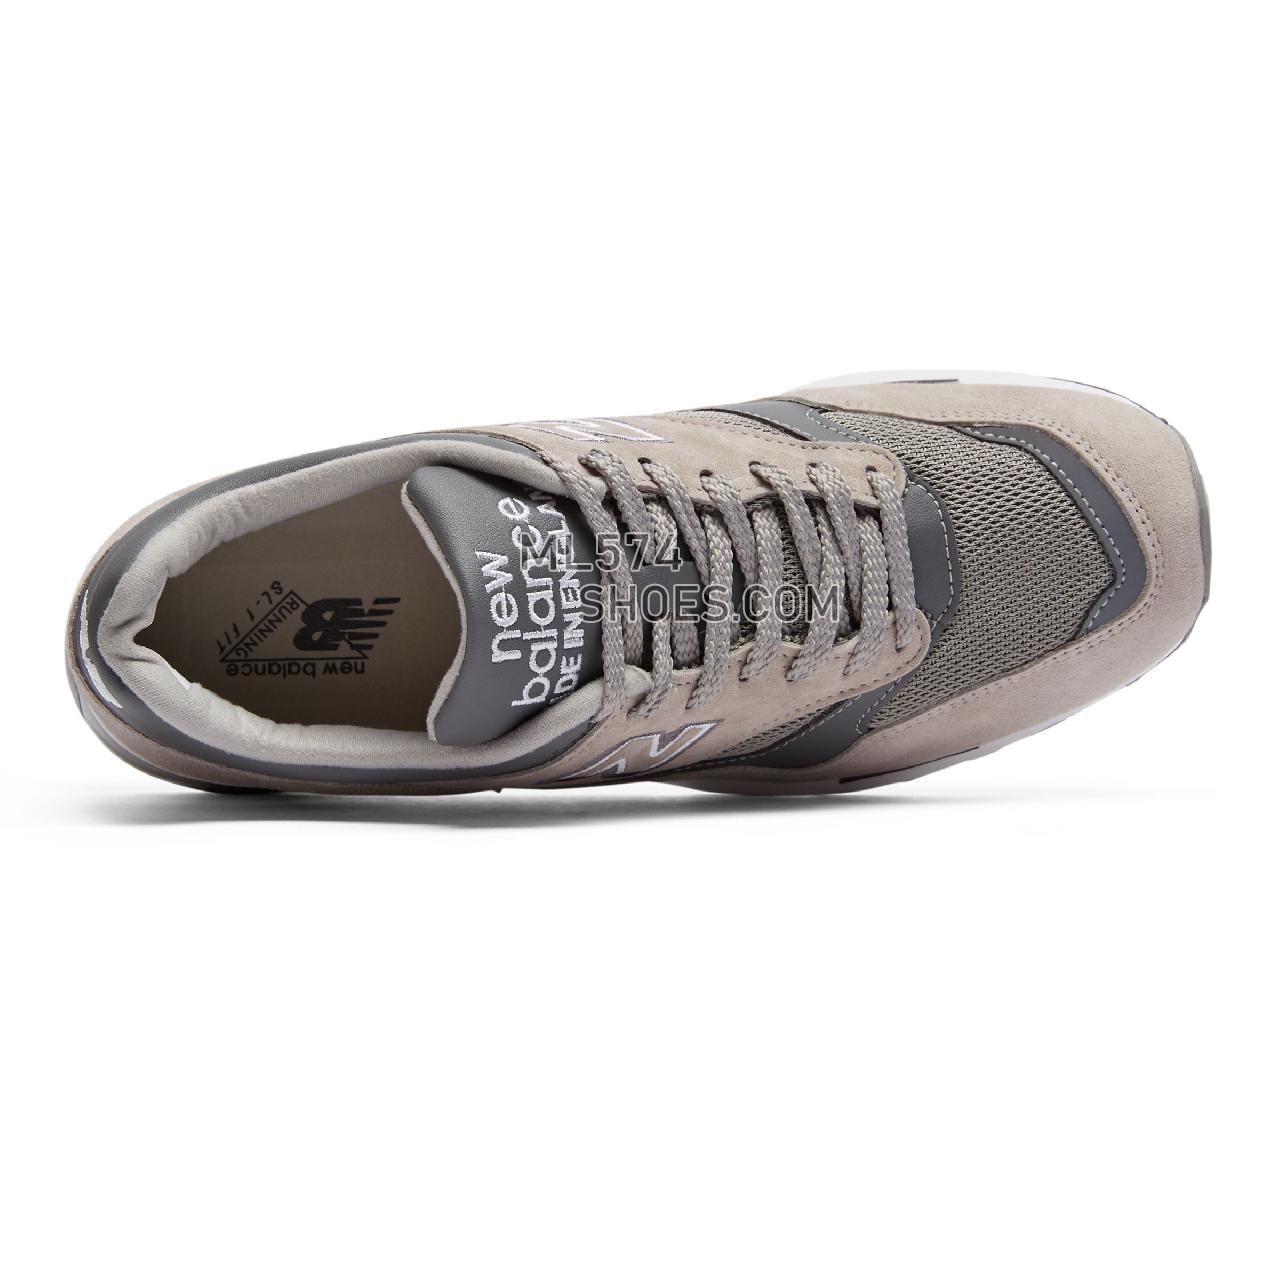 New Balance Made in UK 1500 - Men's Made in UK 1500 Classic - Grey with Dark Grey and White - M1500PGL